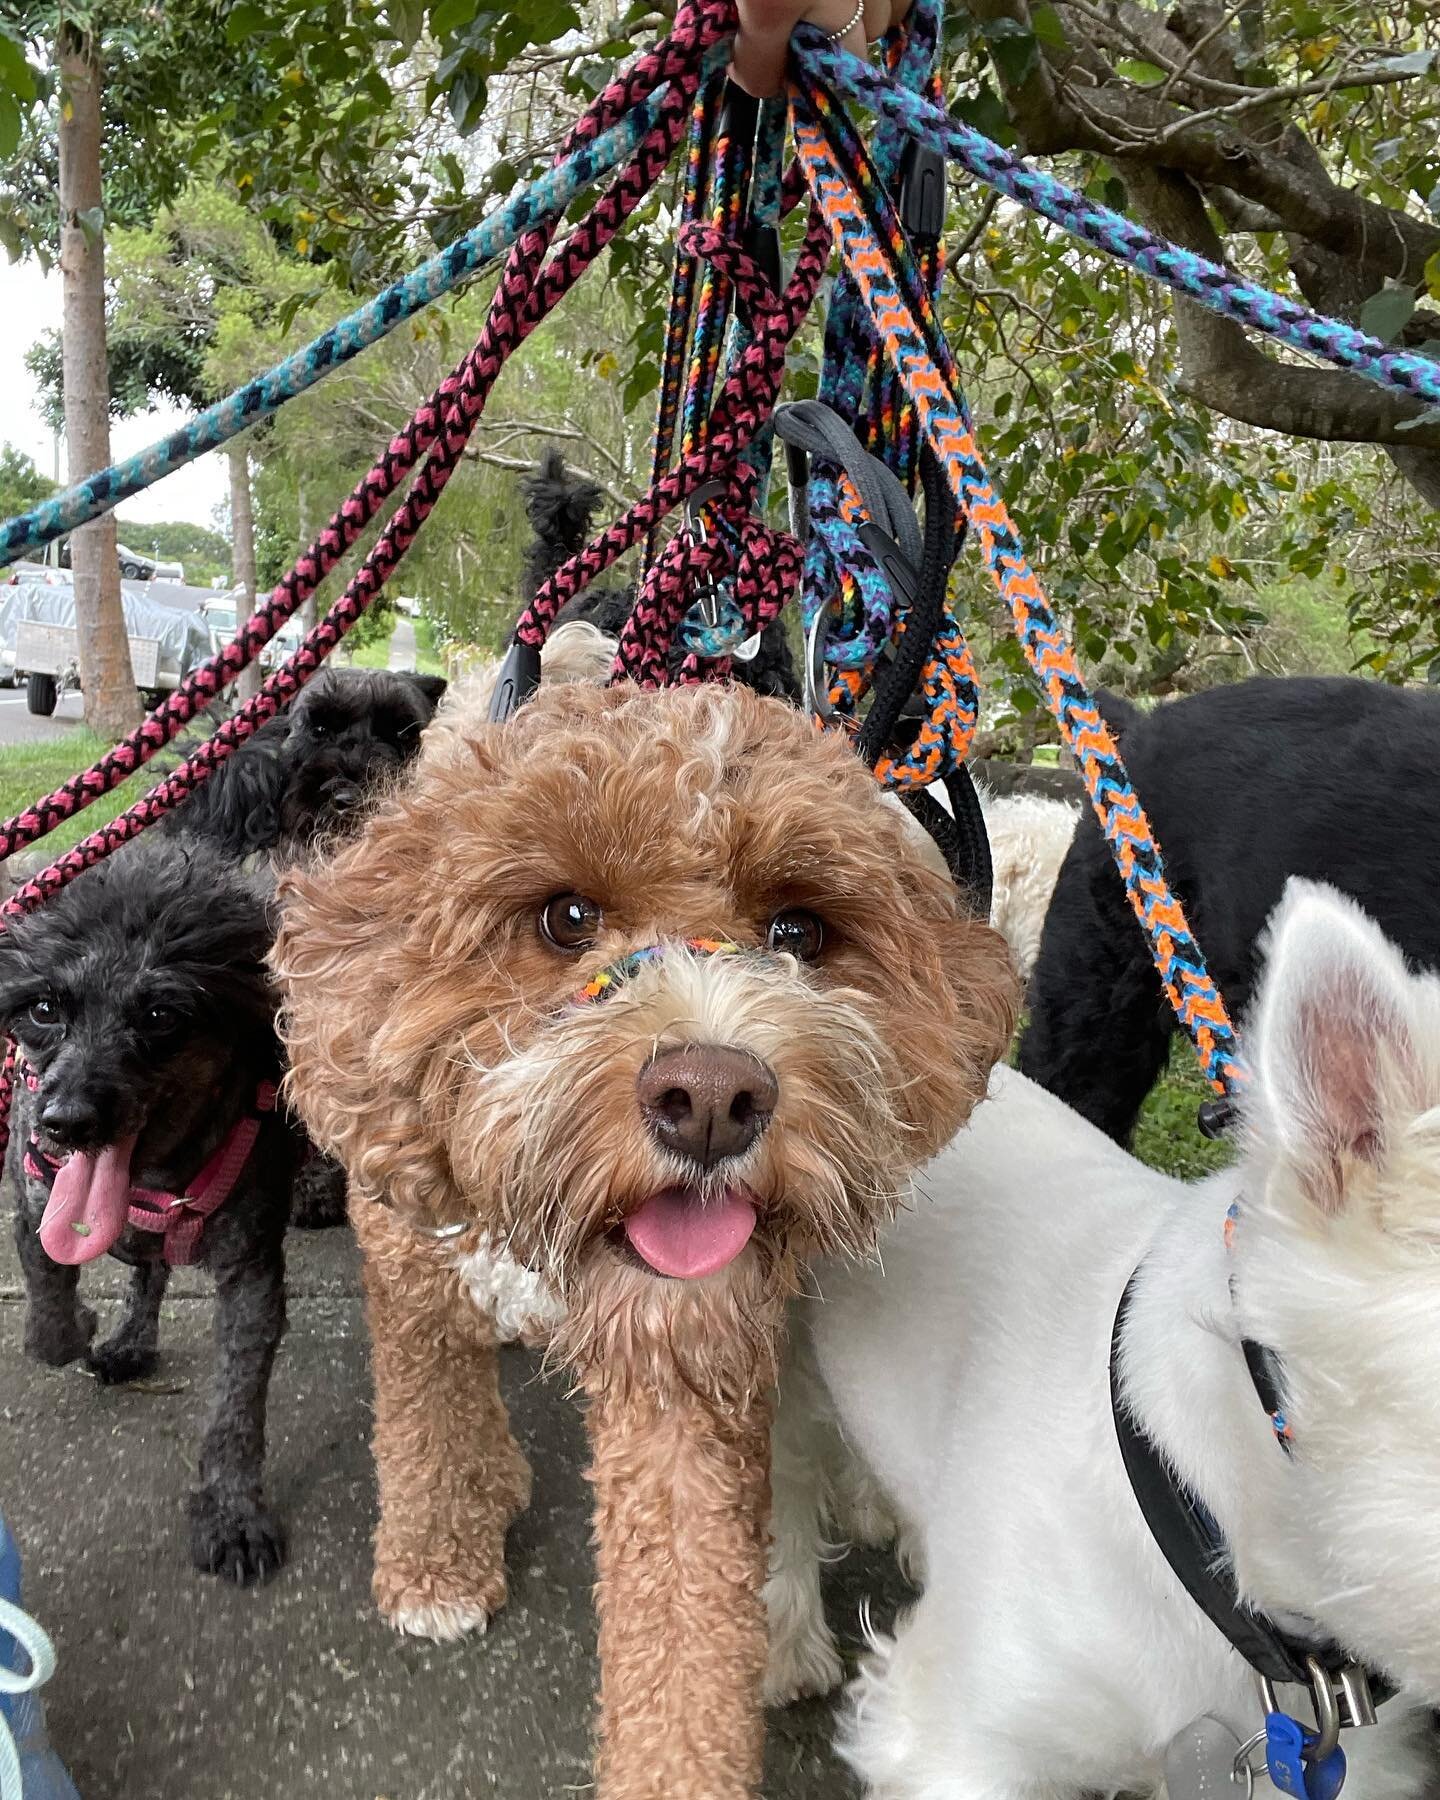 Thursday adventures with these cool kids 💦🐾💙🐶

Contact us via our website or DM if you would like your dog to join the DOGGI pack!
.
.
.
.
.
#dogdaycarebrisbane #dogwalkerbrisbane #dogsofbrisbane #dogsofpaddington #dogdaycarepaddington #dogwalker